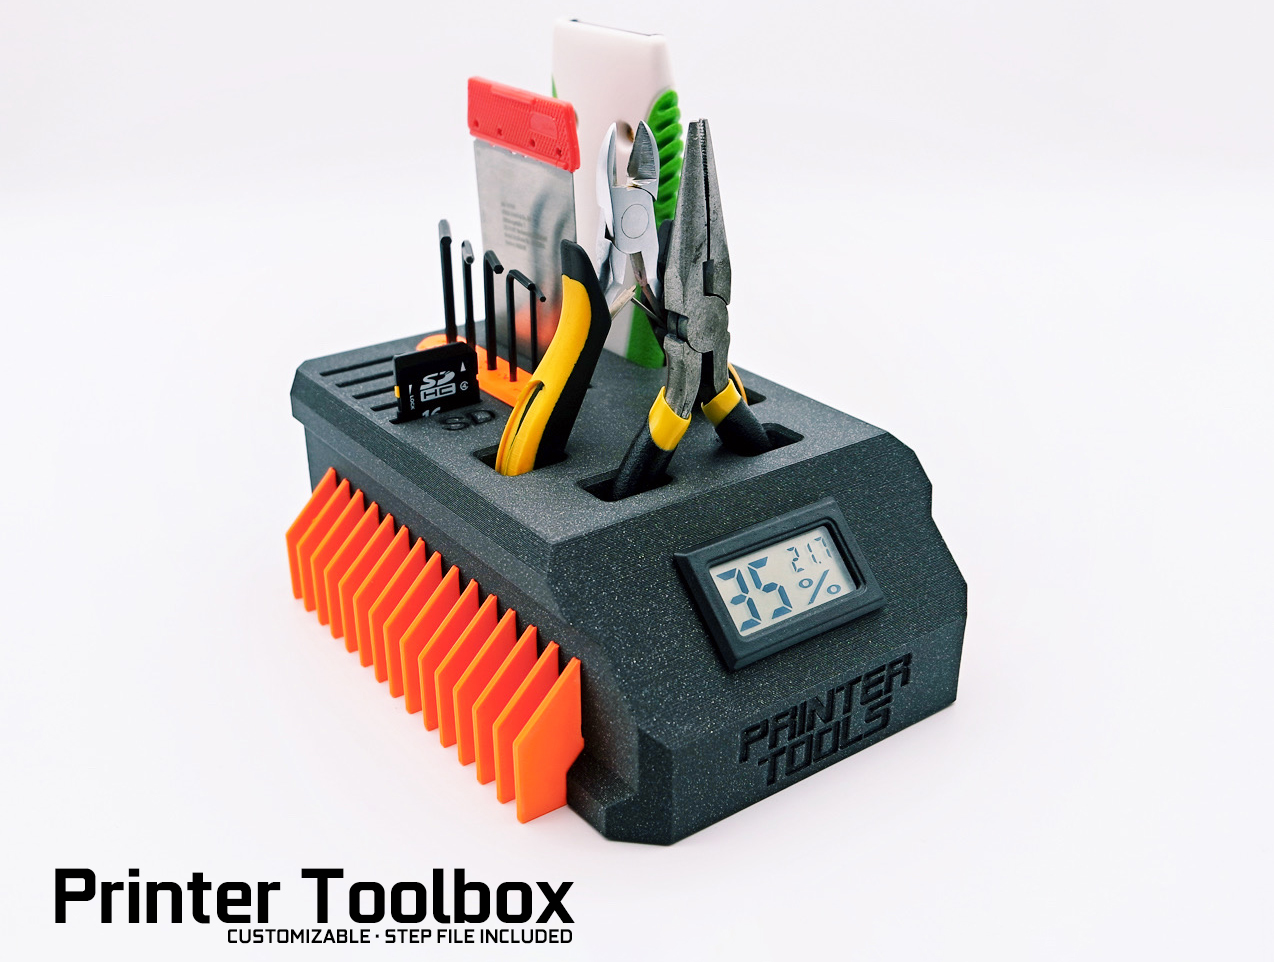 Printer Toolbox · customizable · step file included